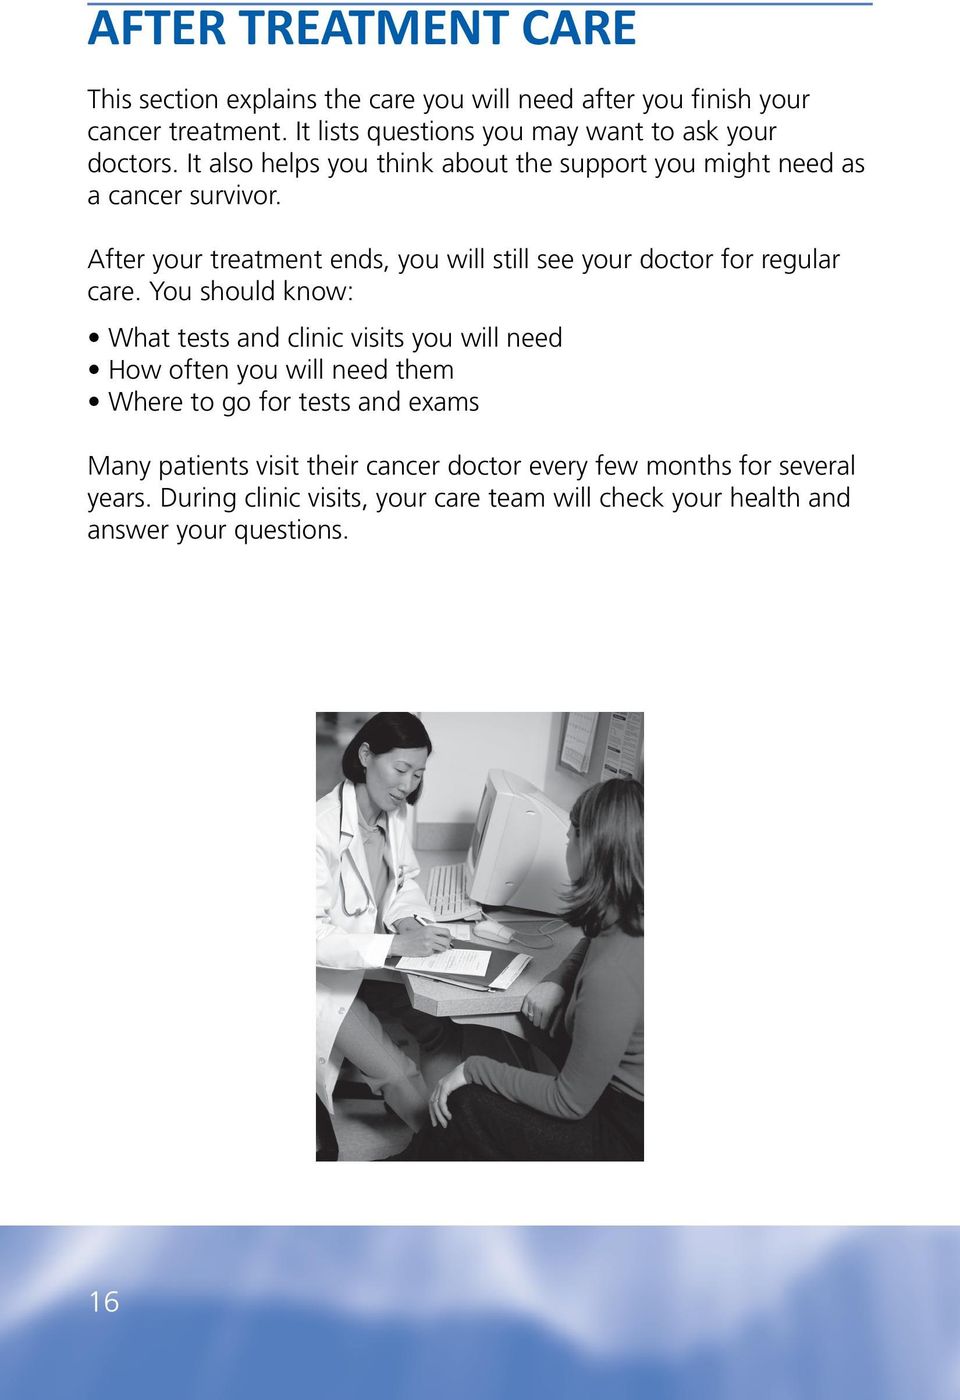 After your treatment ends, you will still see your doctor for regular care.